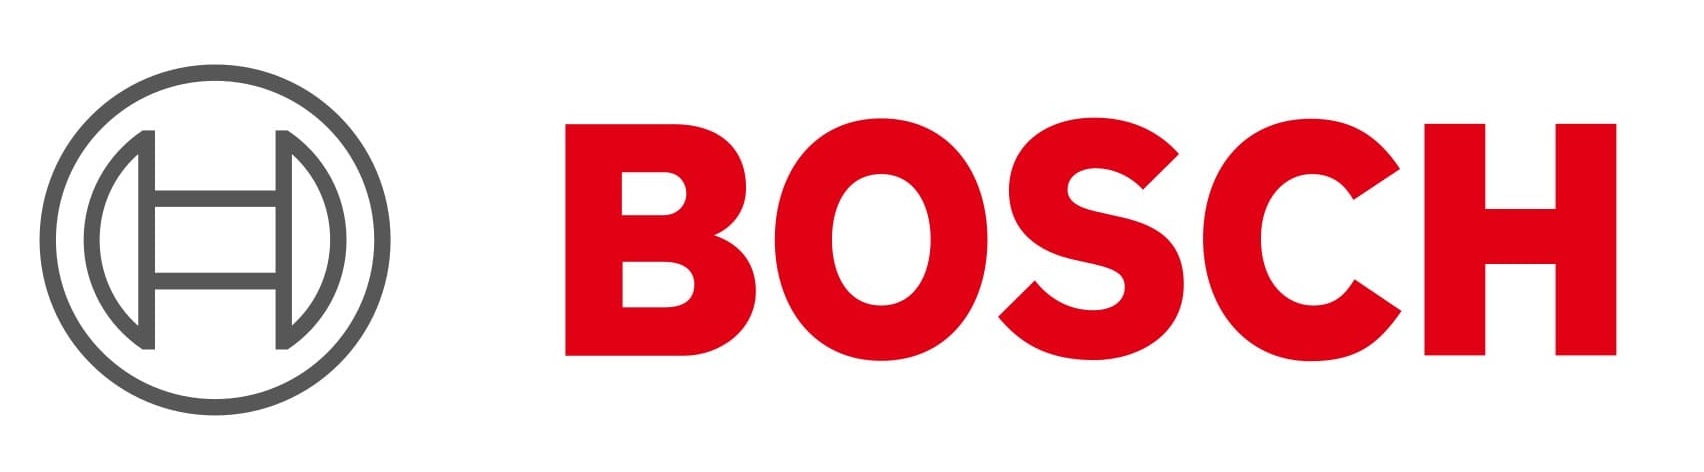 BOSCH Stoves Oven Service, Whirlpool Stoves Oven Service